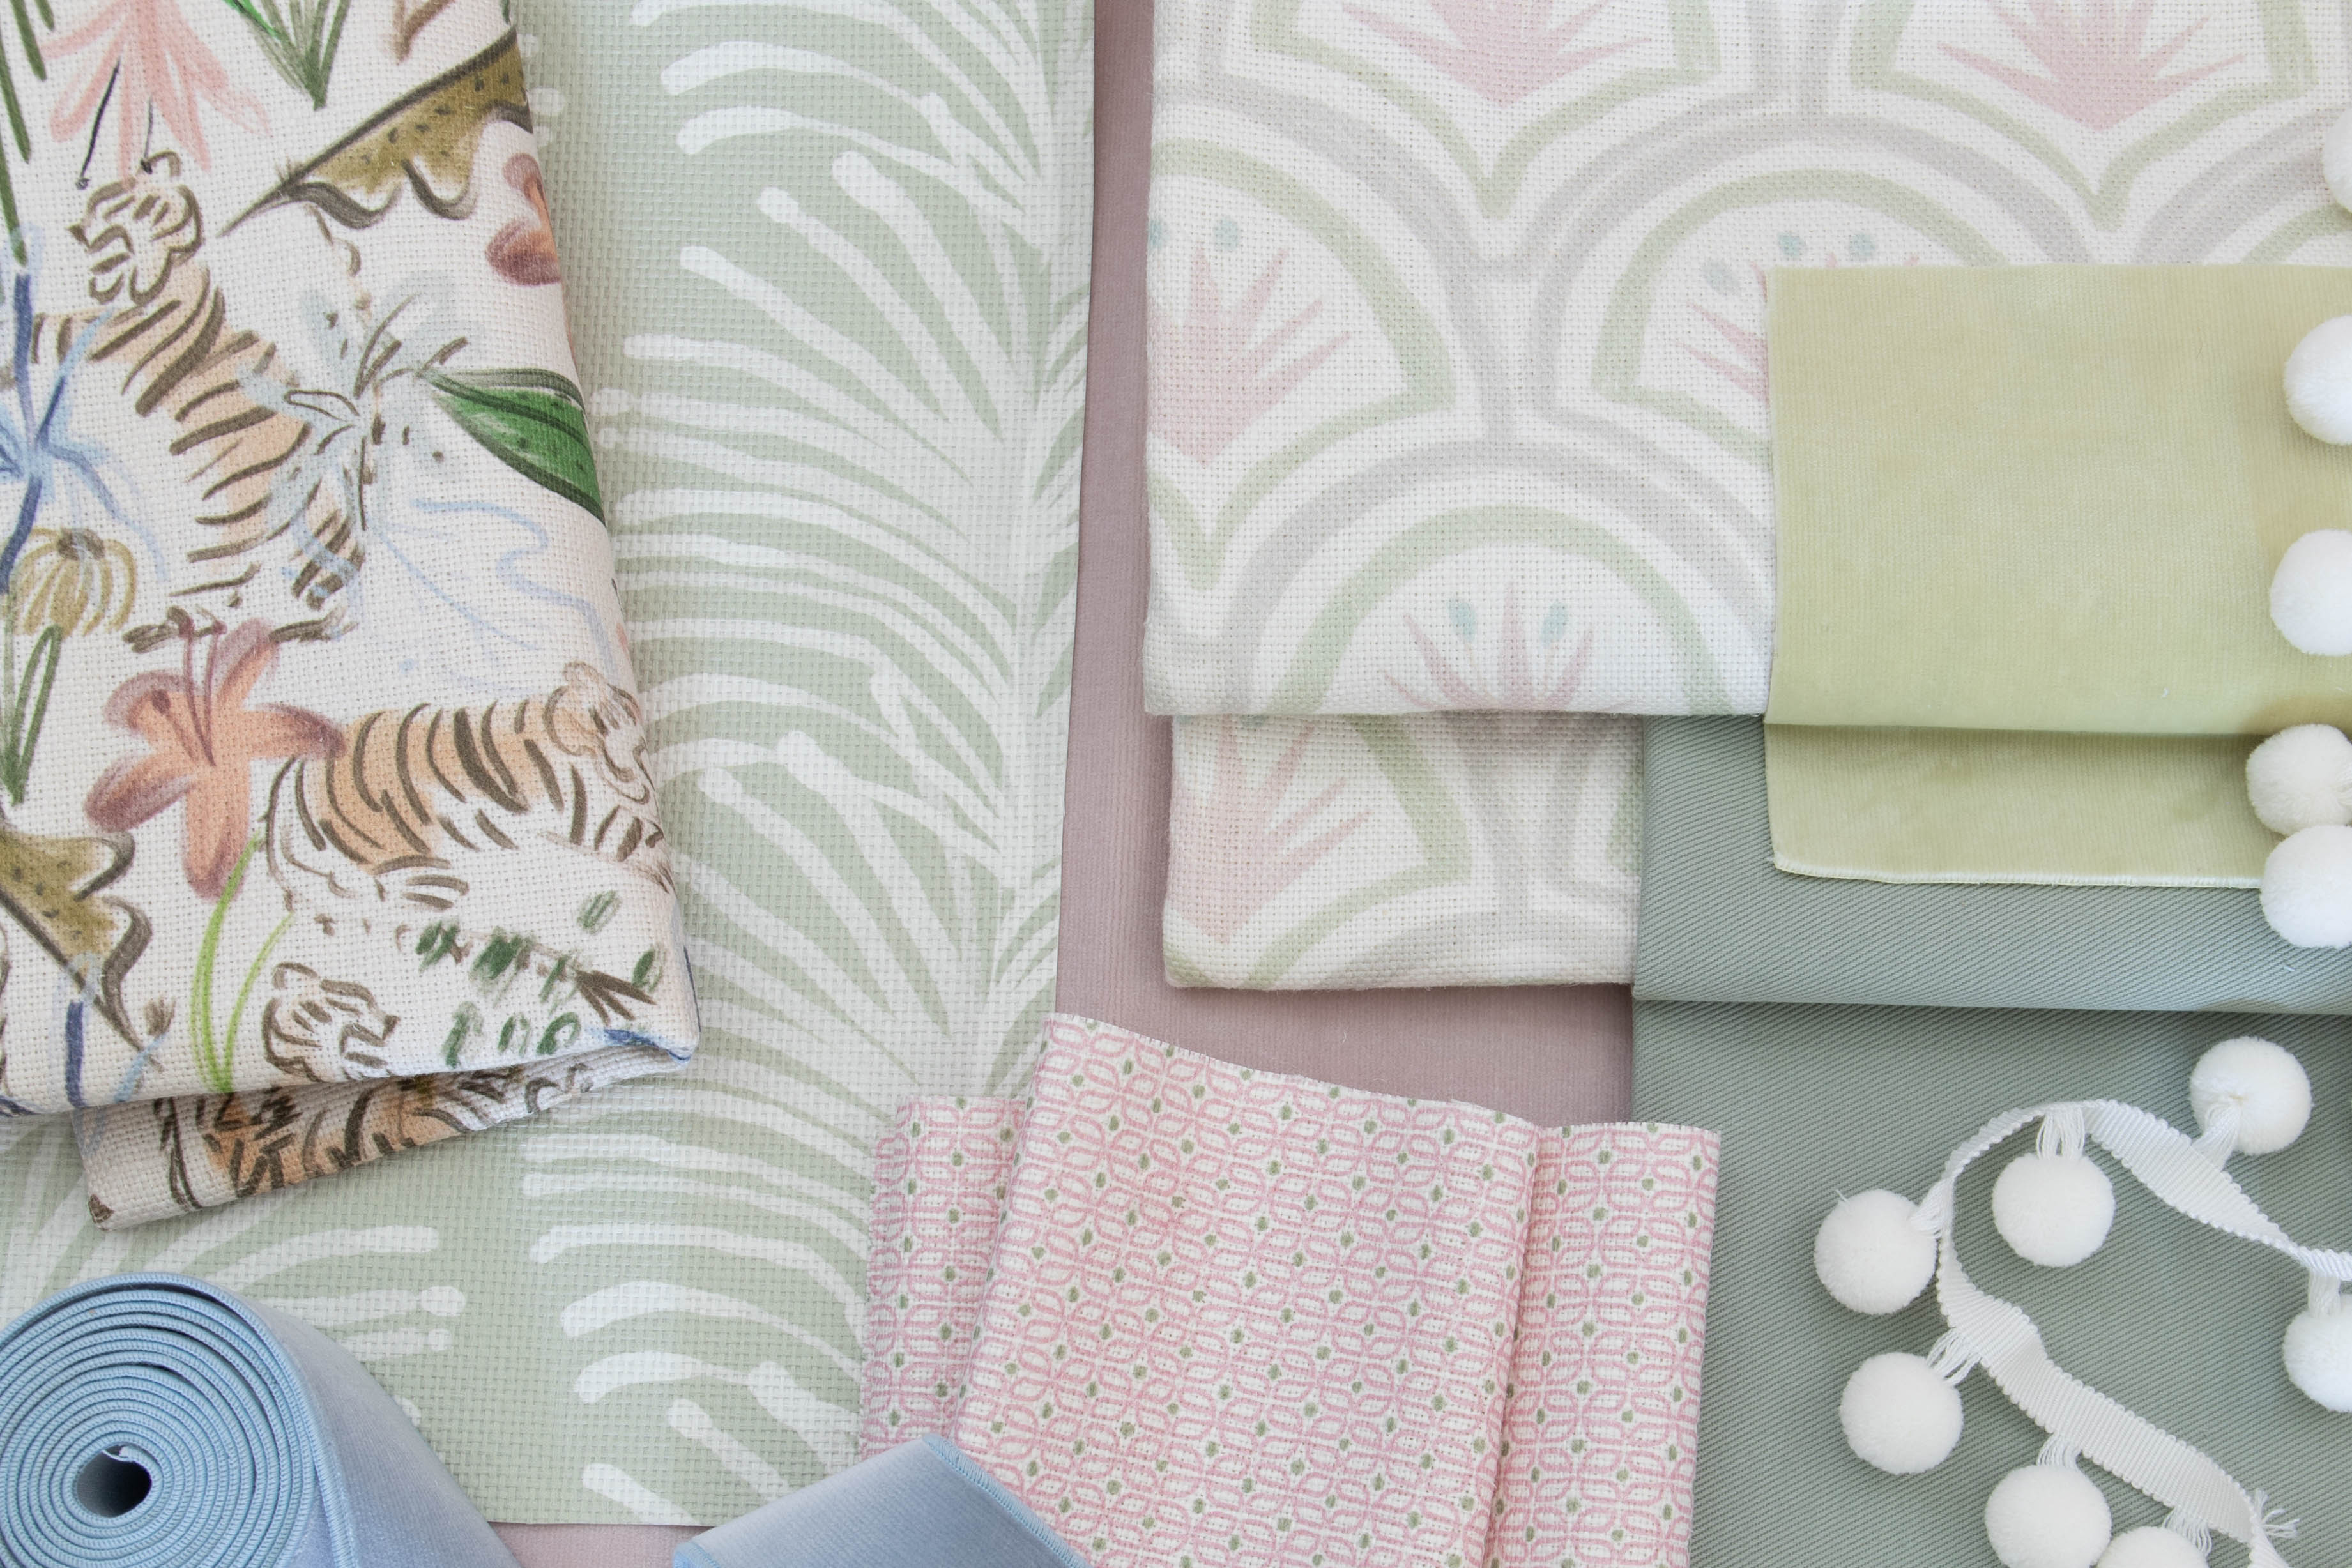 Interior design moodboard and fabric inspirations with sage botanical stripe fabric, pink and green art deco fabric, pink tiger chinoiserie fabirc and green velvet fabric